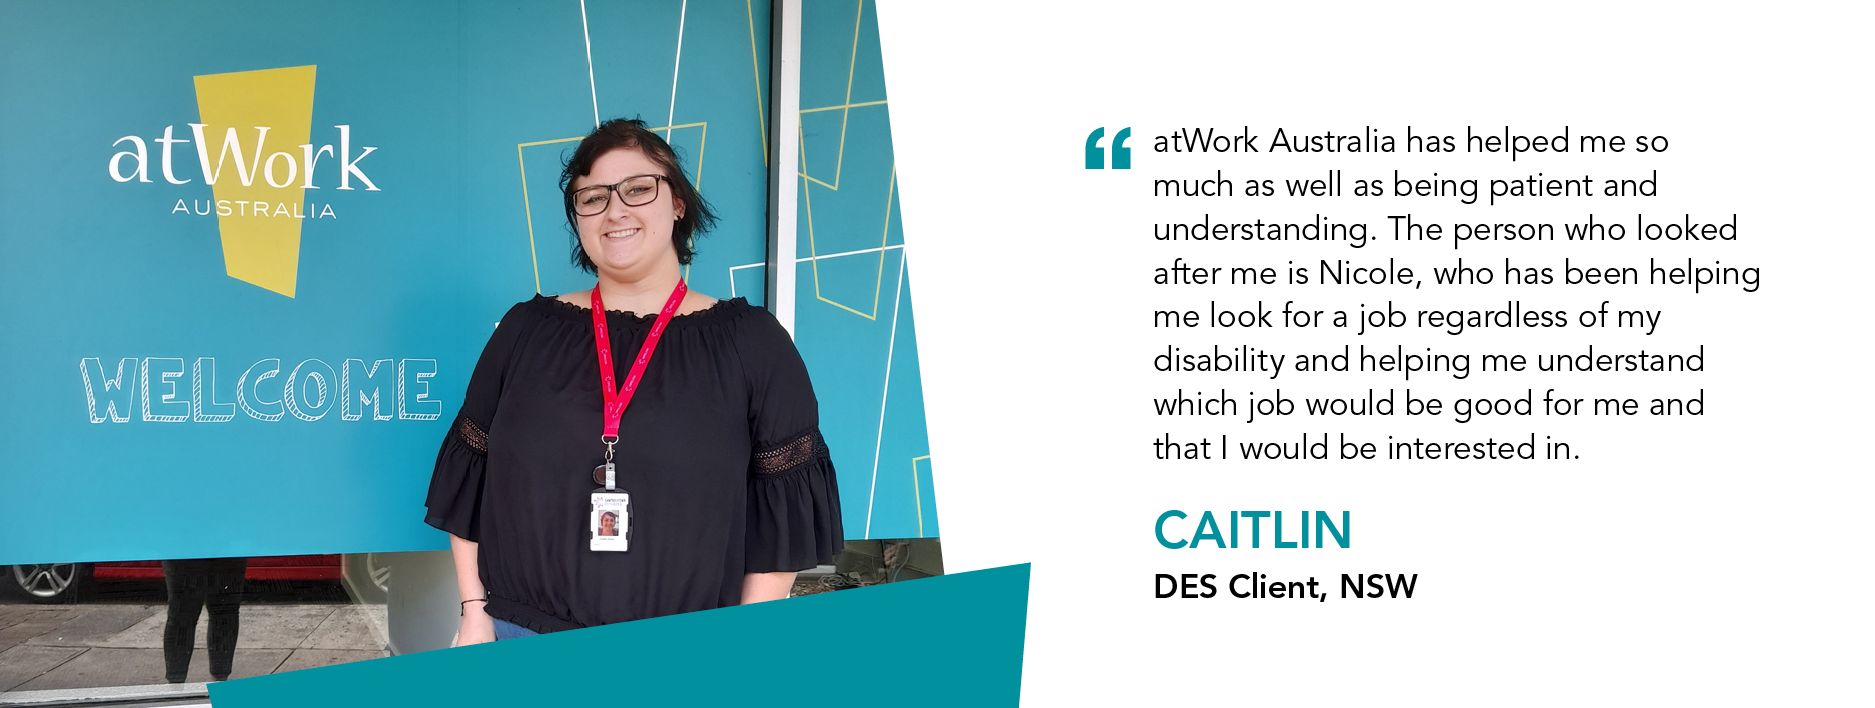 “atWork Australia has helped me so much as well as being patient and understanding. The person who looked after me is Nicole, who has been helping me look for a job regardless of my disability and helping me understand which job would be good for me and that I would be interested in.” – Caitlin, DES Client, NSW